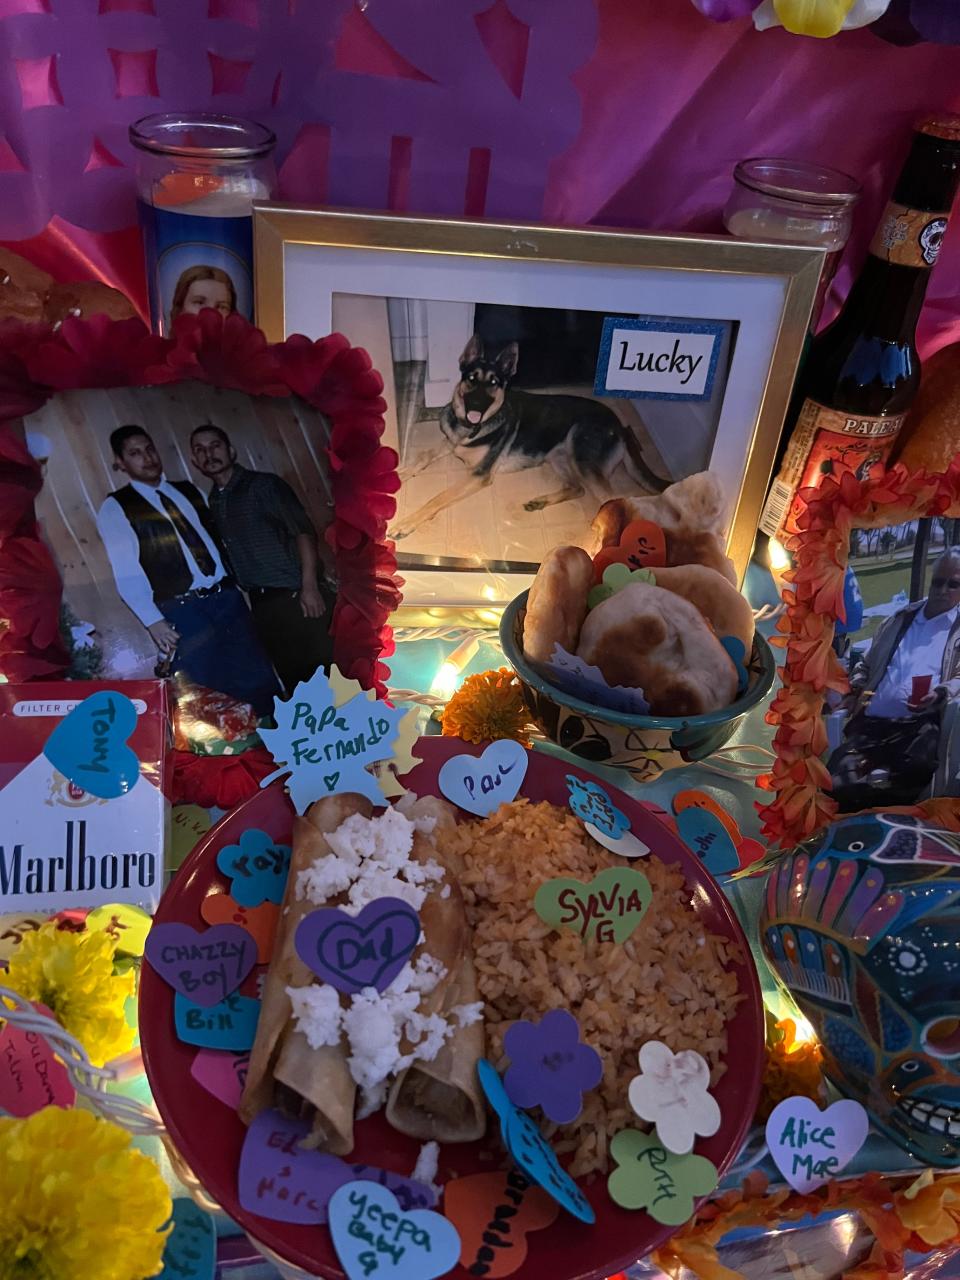 Pictures of dead pets and family members are displayed alongside candles and "ofrendas," or offerings, on an altar during the Día de Los Muertos celebration at the Hollywood Forever Cemetery in Los Angeles on Saturday, Oct. 28, 2023.